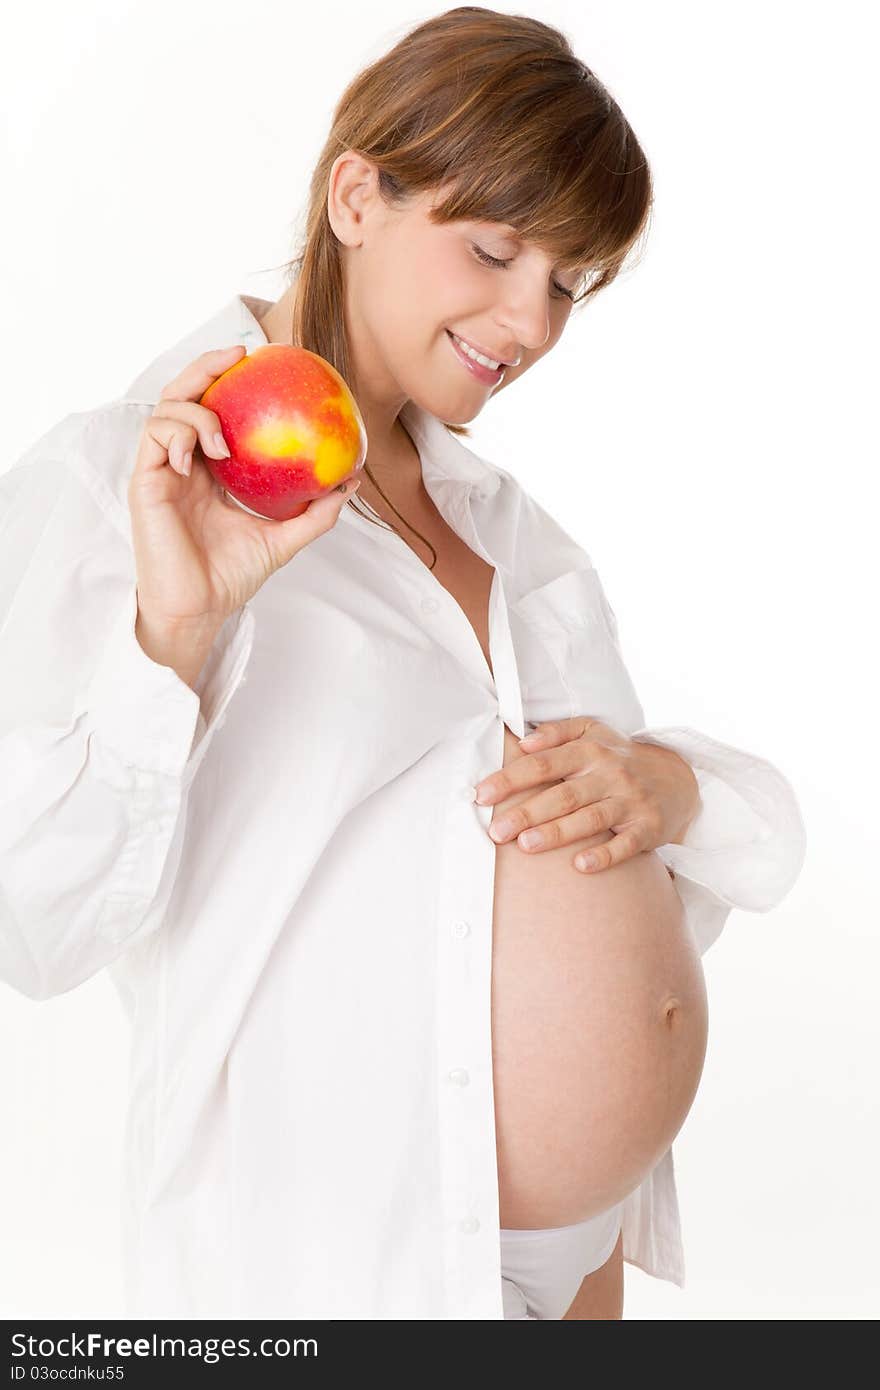 Pregnant woman holding an apple. Pregnant woman holding an apple